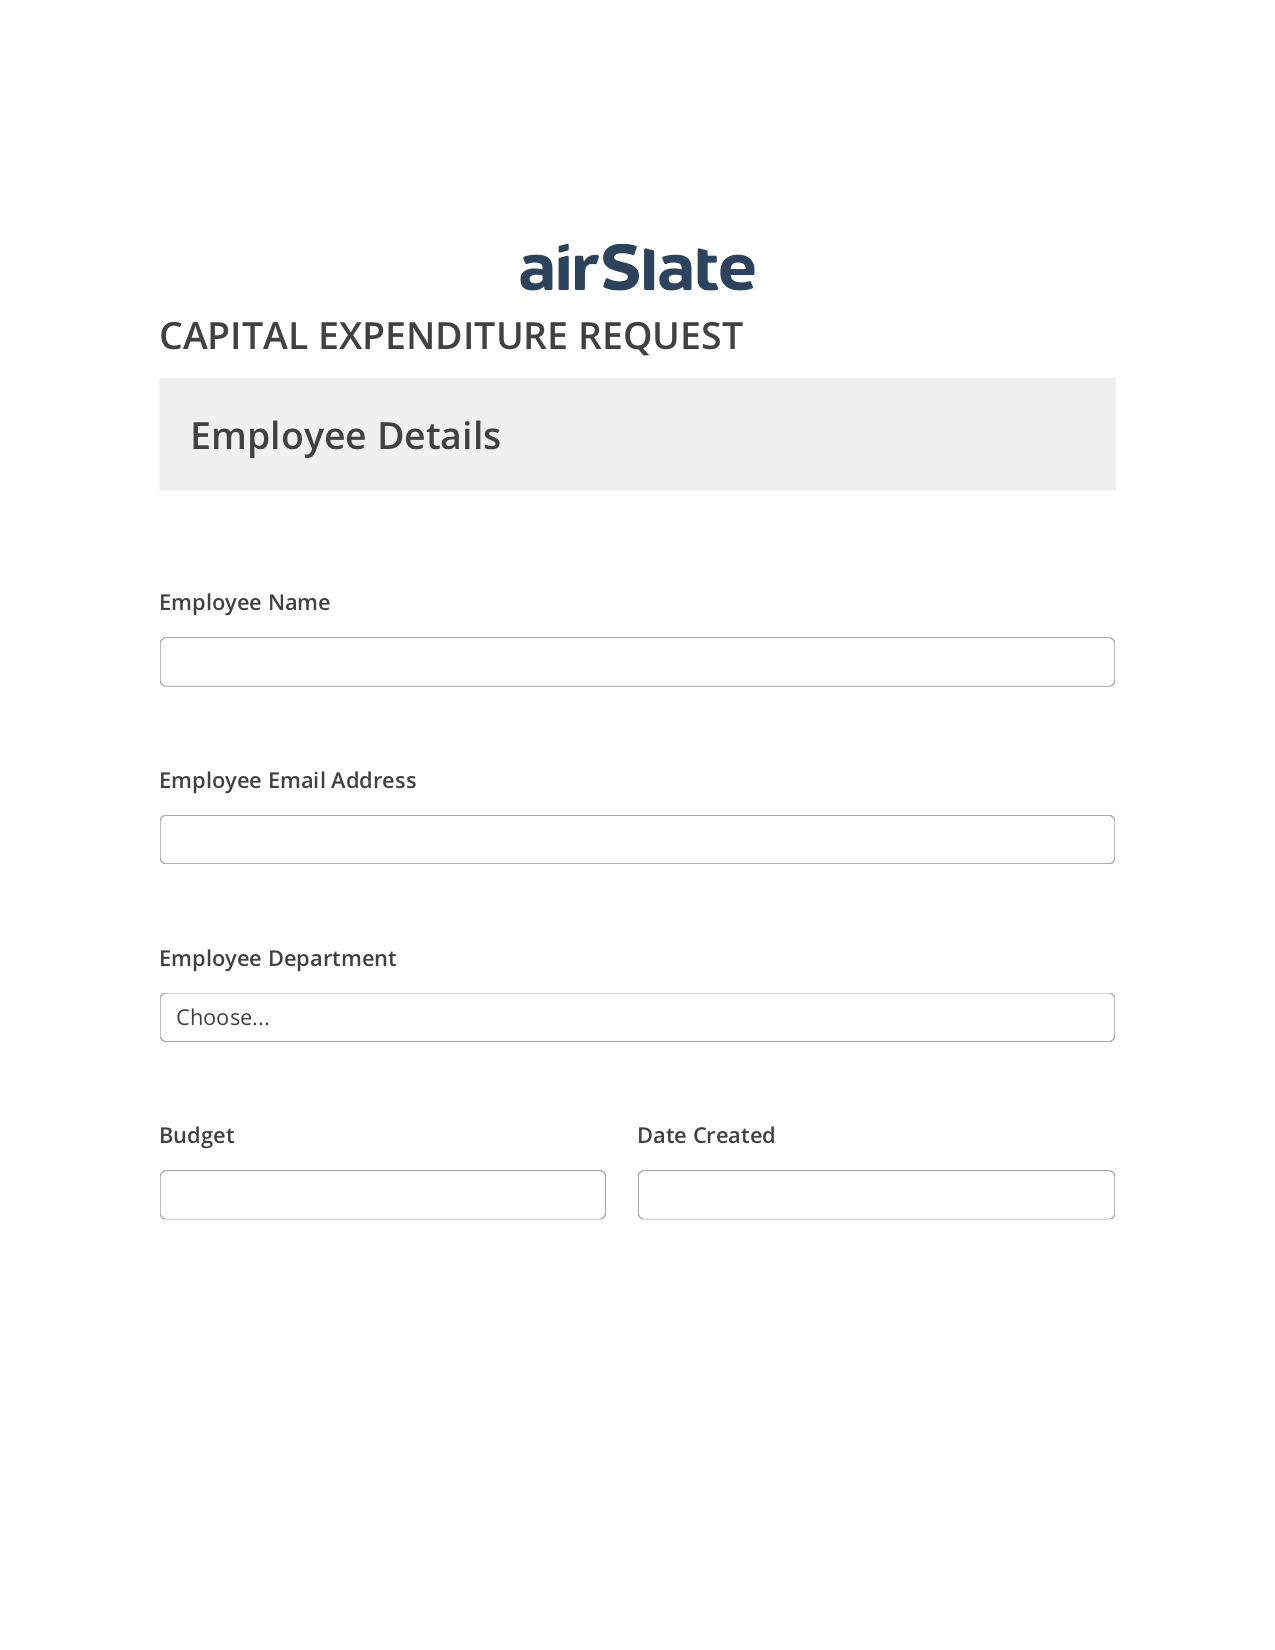 Capital Expenditure Request Approval Workflow Pre-fill Document Bot, Send a Slate with Roles Bot, Export to WebMerge Bot